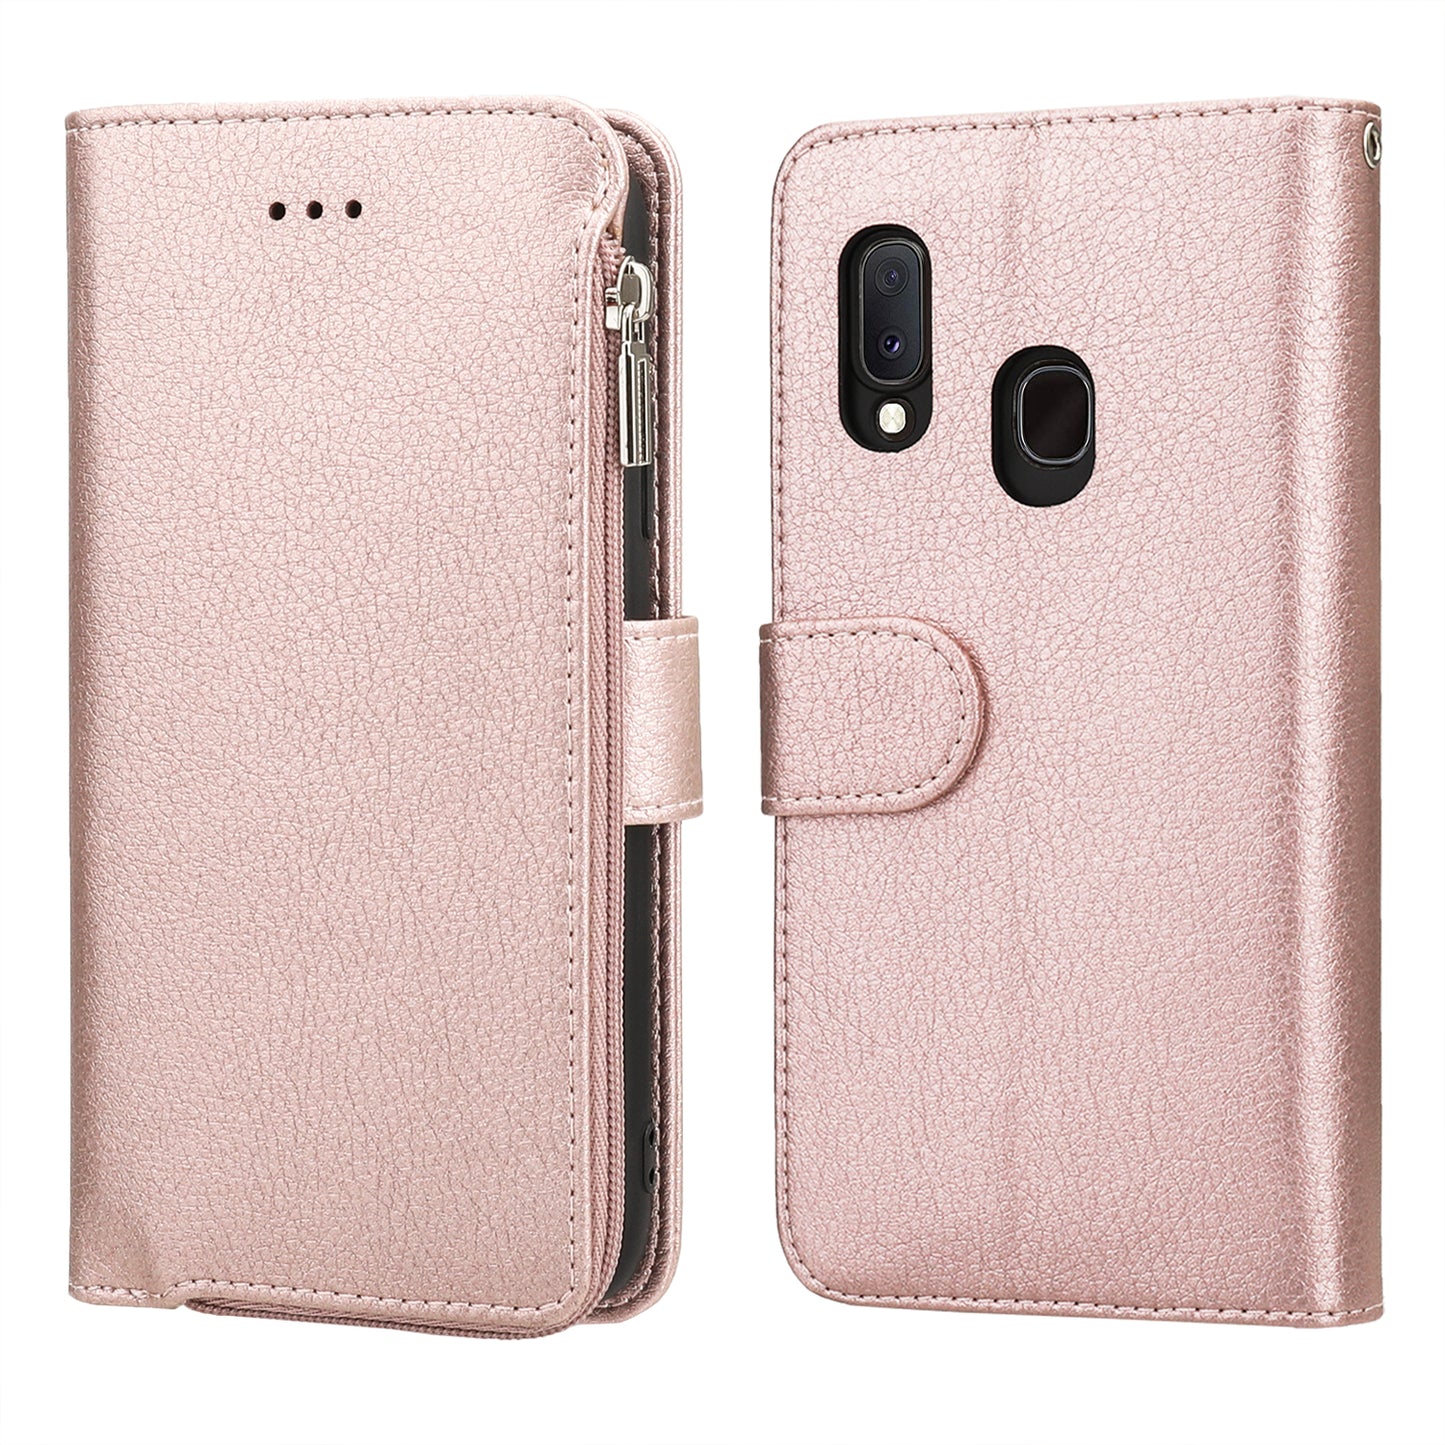 Samsung Galaxy A20e Leather Case Zipper Pouch TPU Fexible Stand Card Slots Magnetic Hand Strap